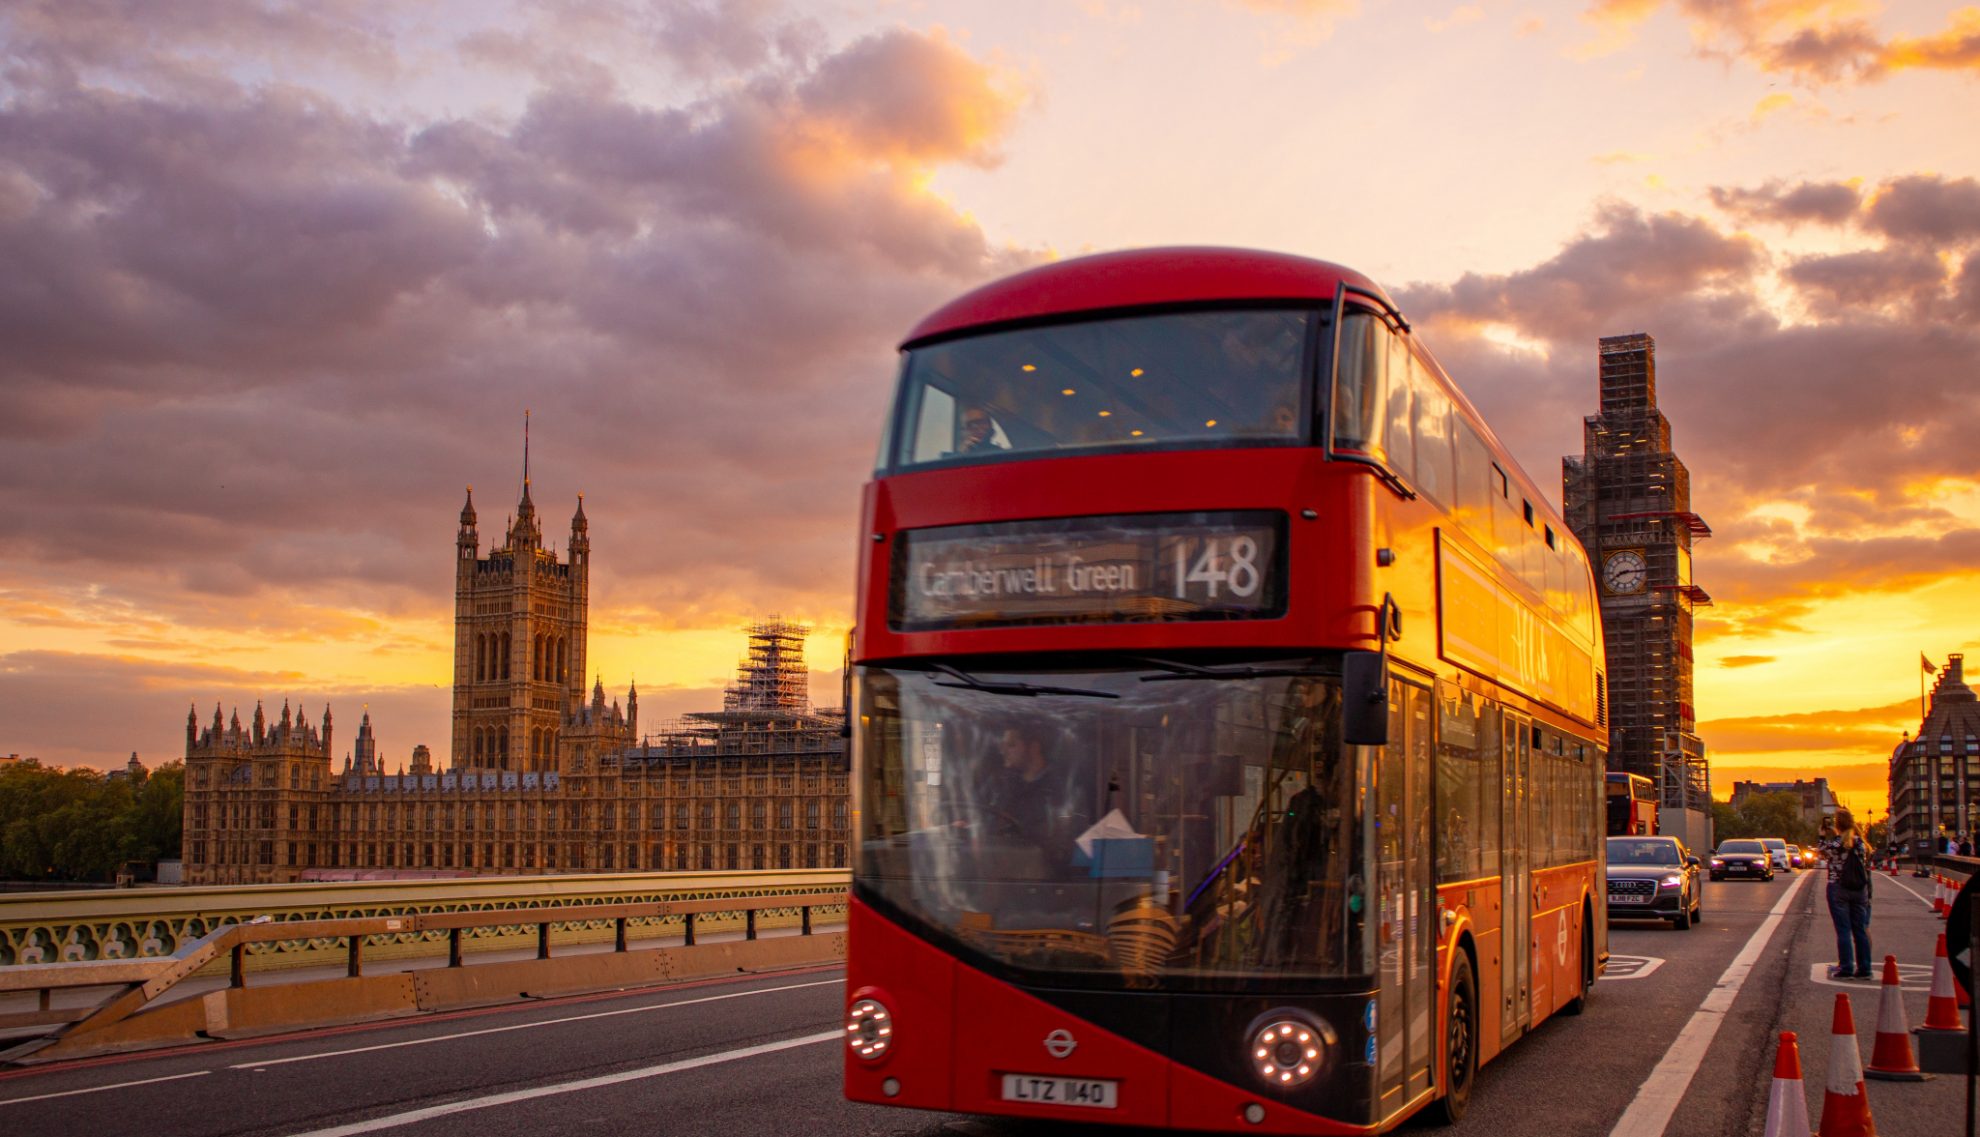 Central London, with a red bus in front of the Palace of Westminster